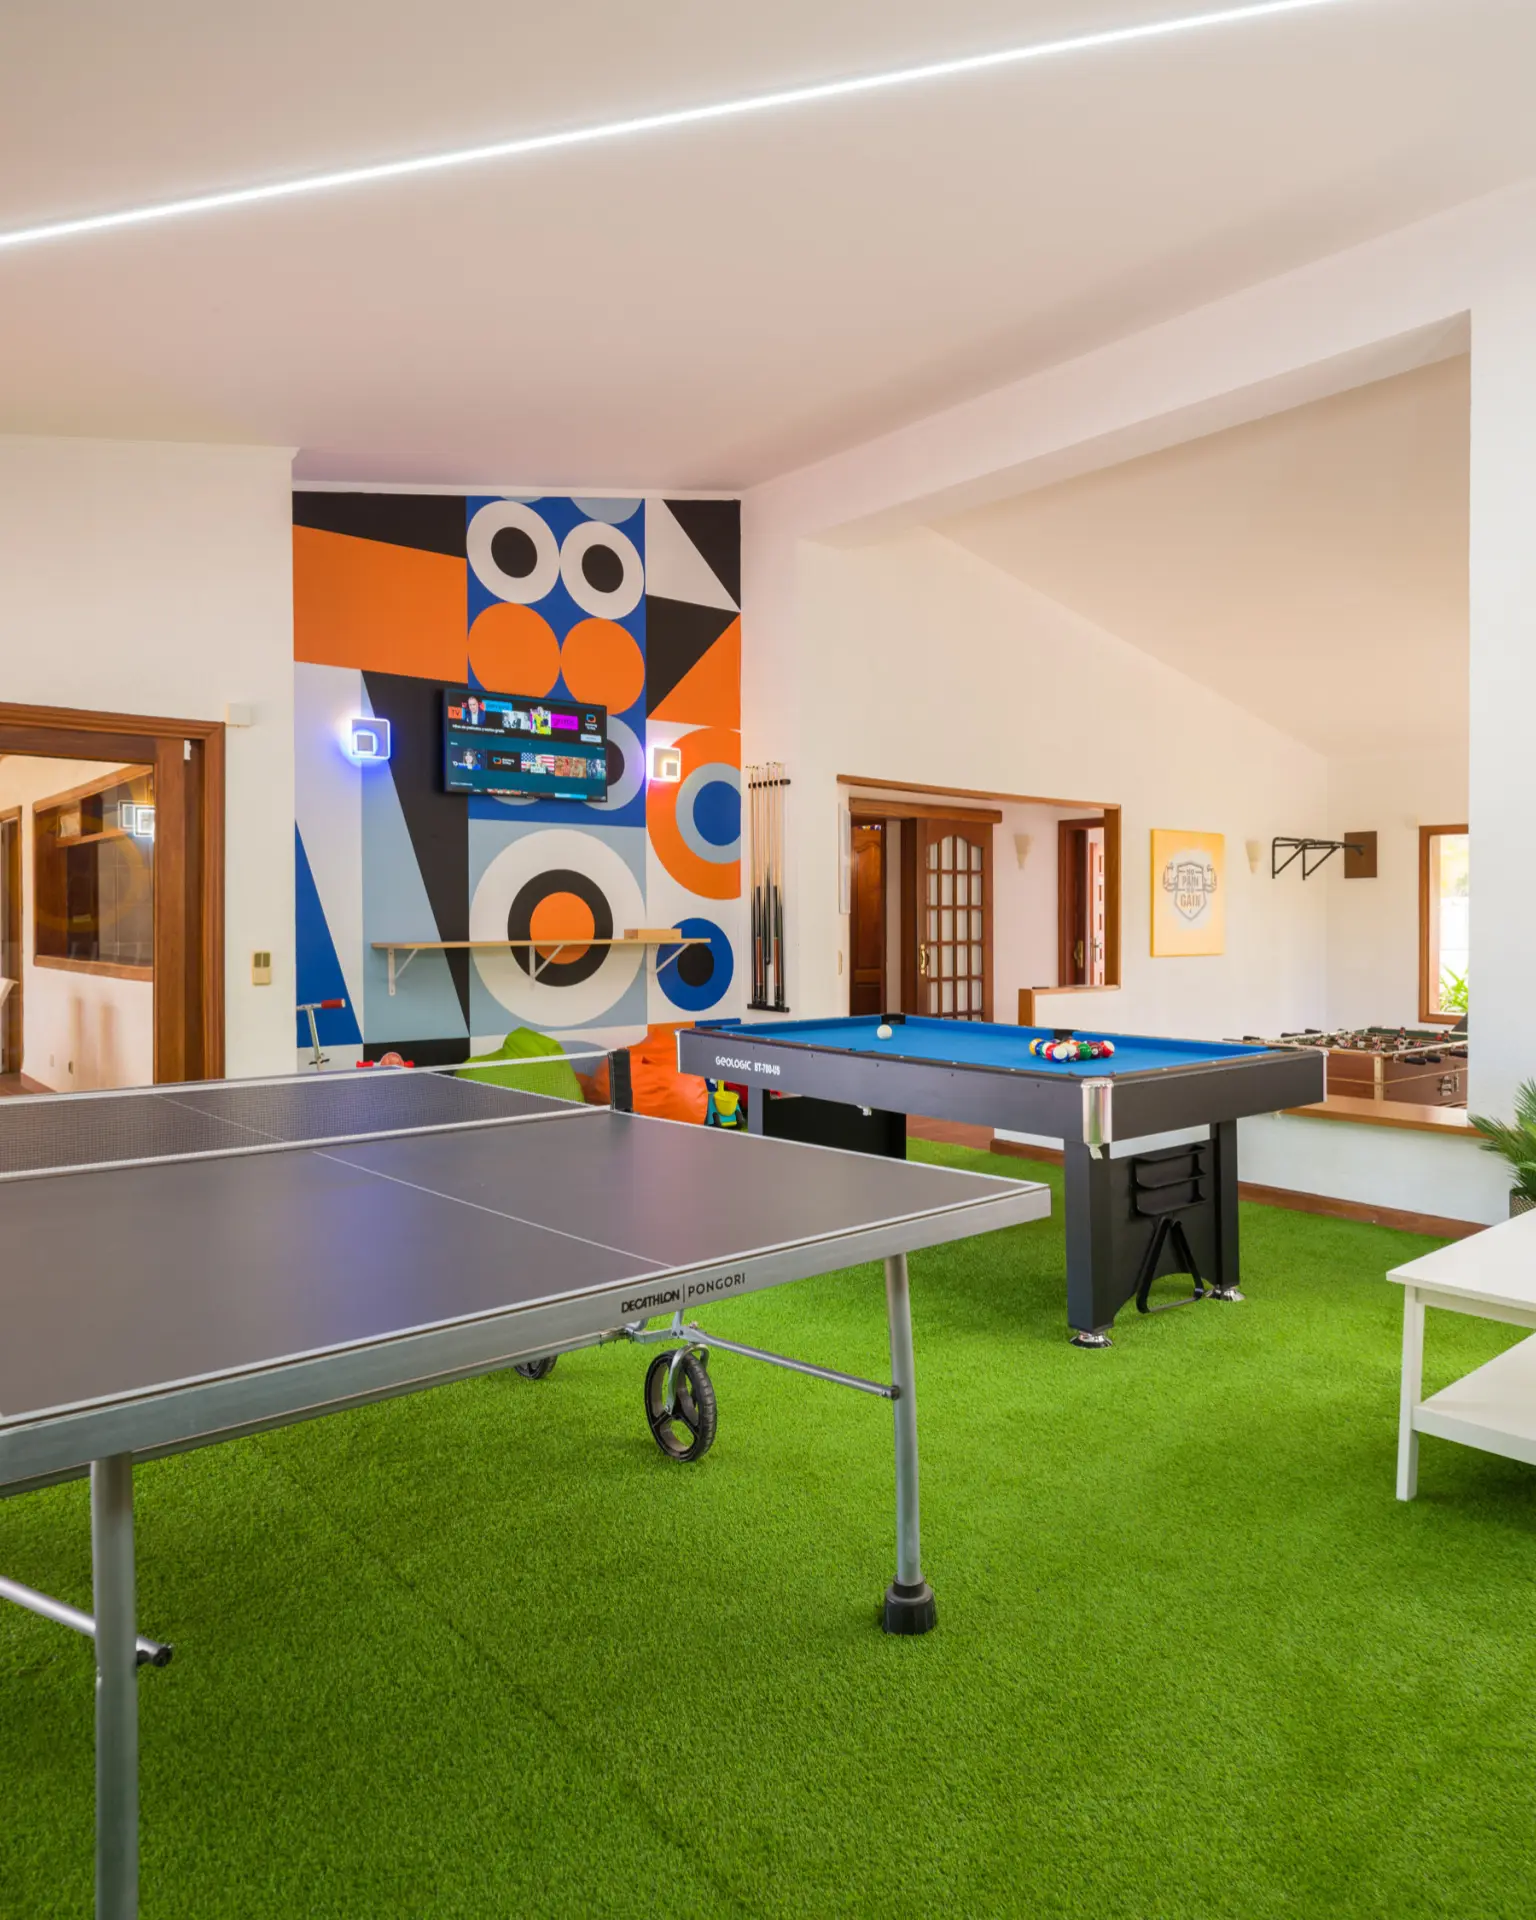 Villa in Maspalomas with games room, billiard table and ping-pong